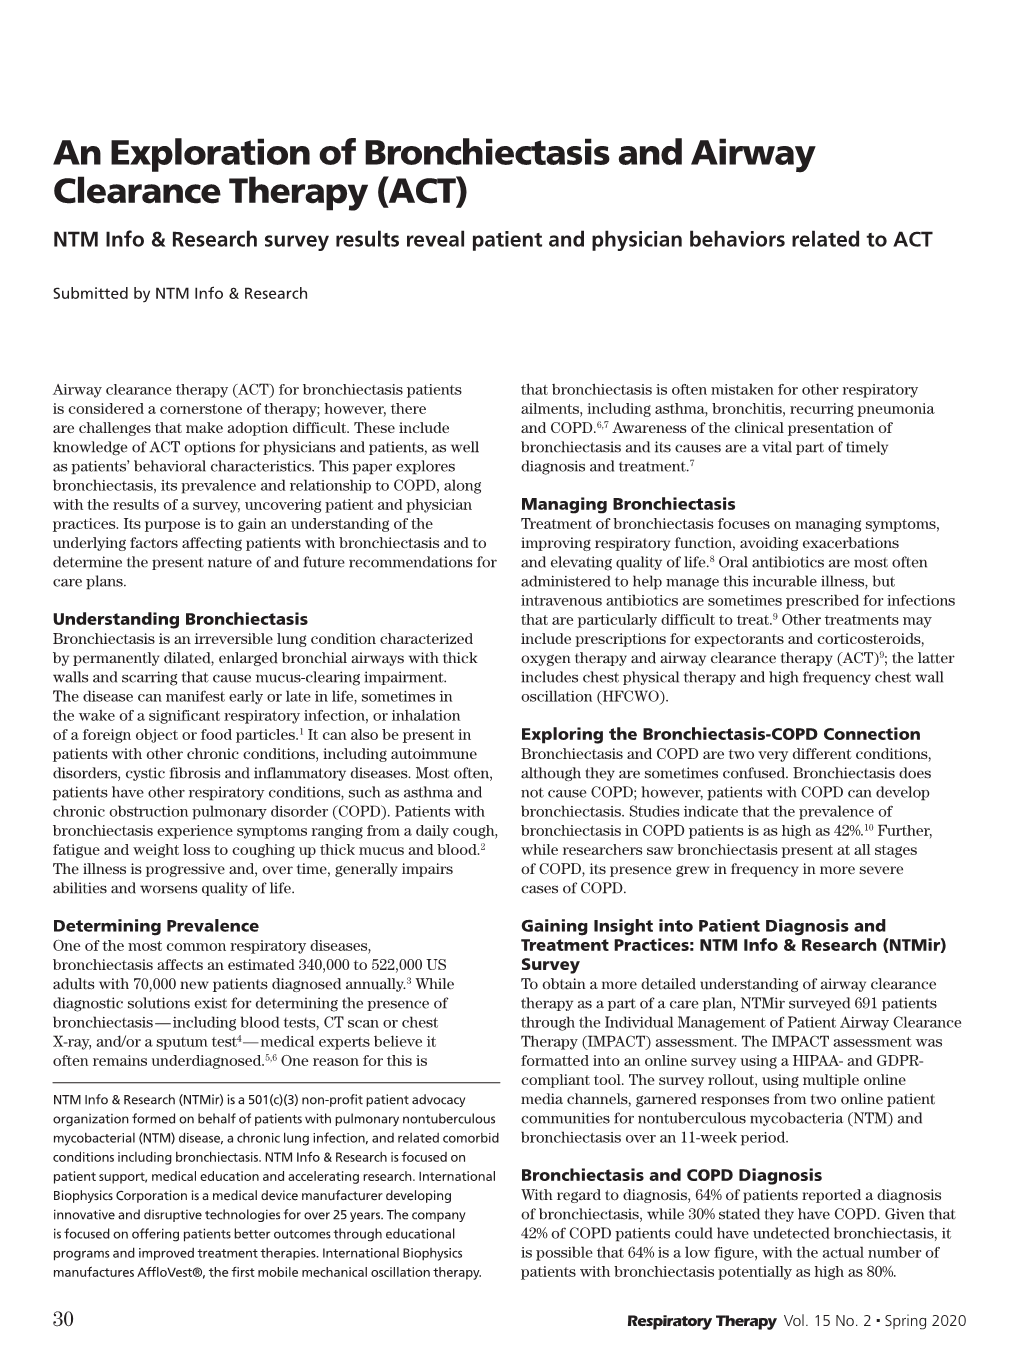 An Exploration of Bronchiectasis and Airway Clearance Therapy (ACT) NTM Info & Research Survey Results Reveal Patient and Physician Behaviors Related to ACT